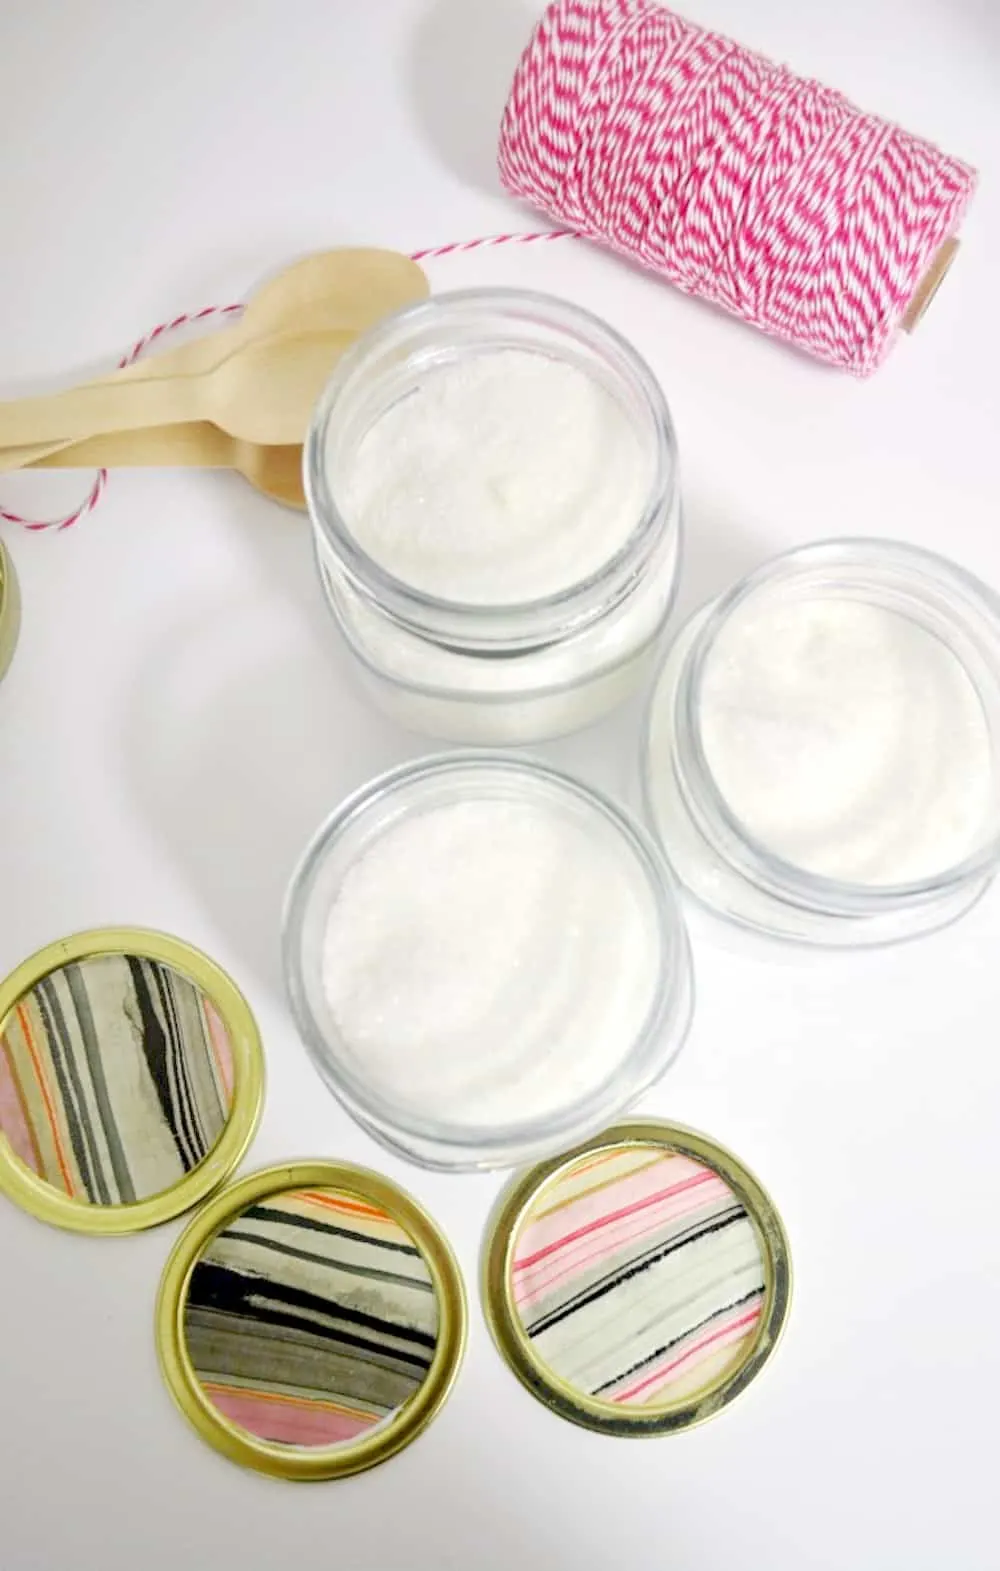 Bath salts in mason jars with baker's twine and wooden spoons